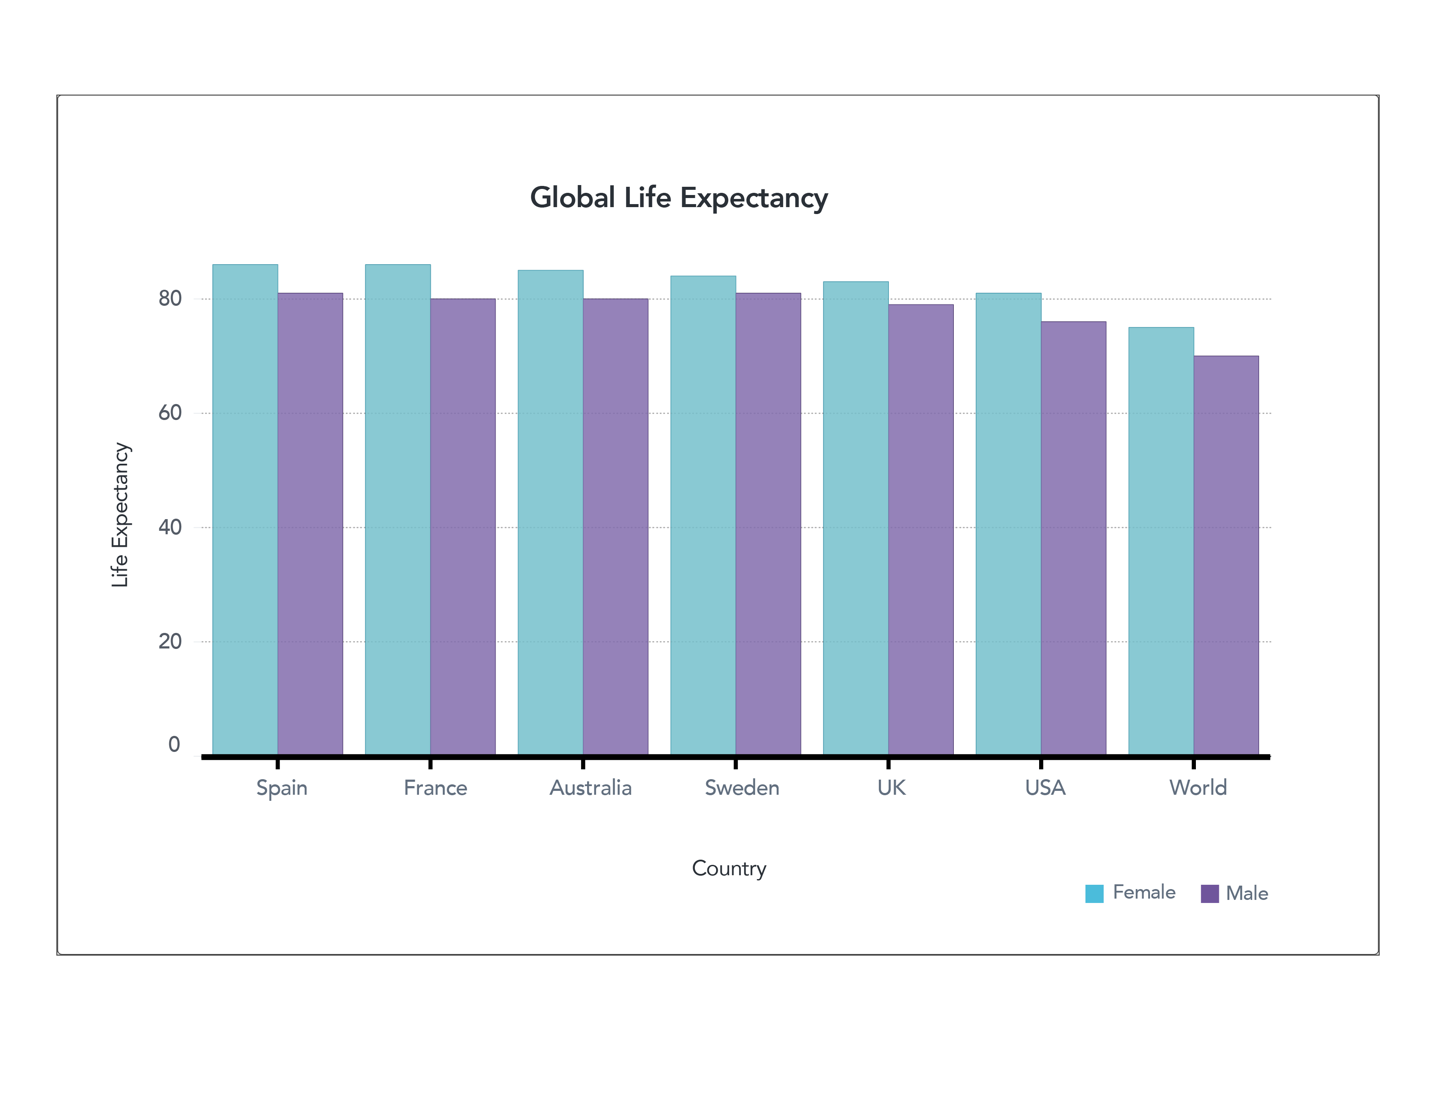 Figure 2. Global Life Expectancy (full axis)